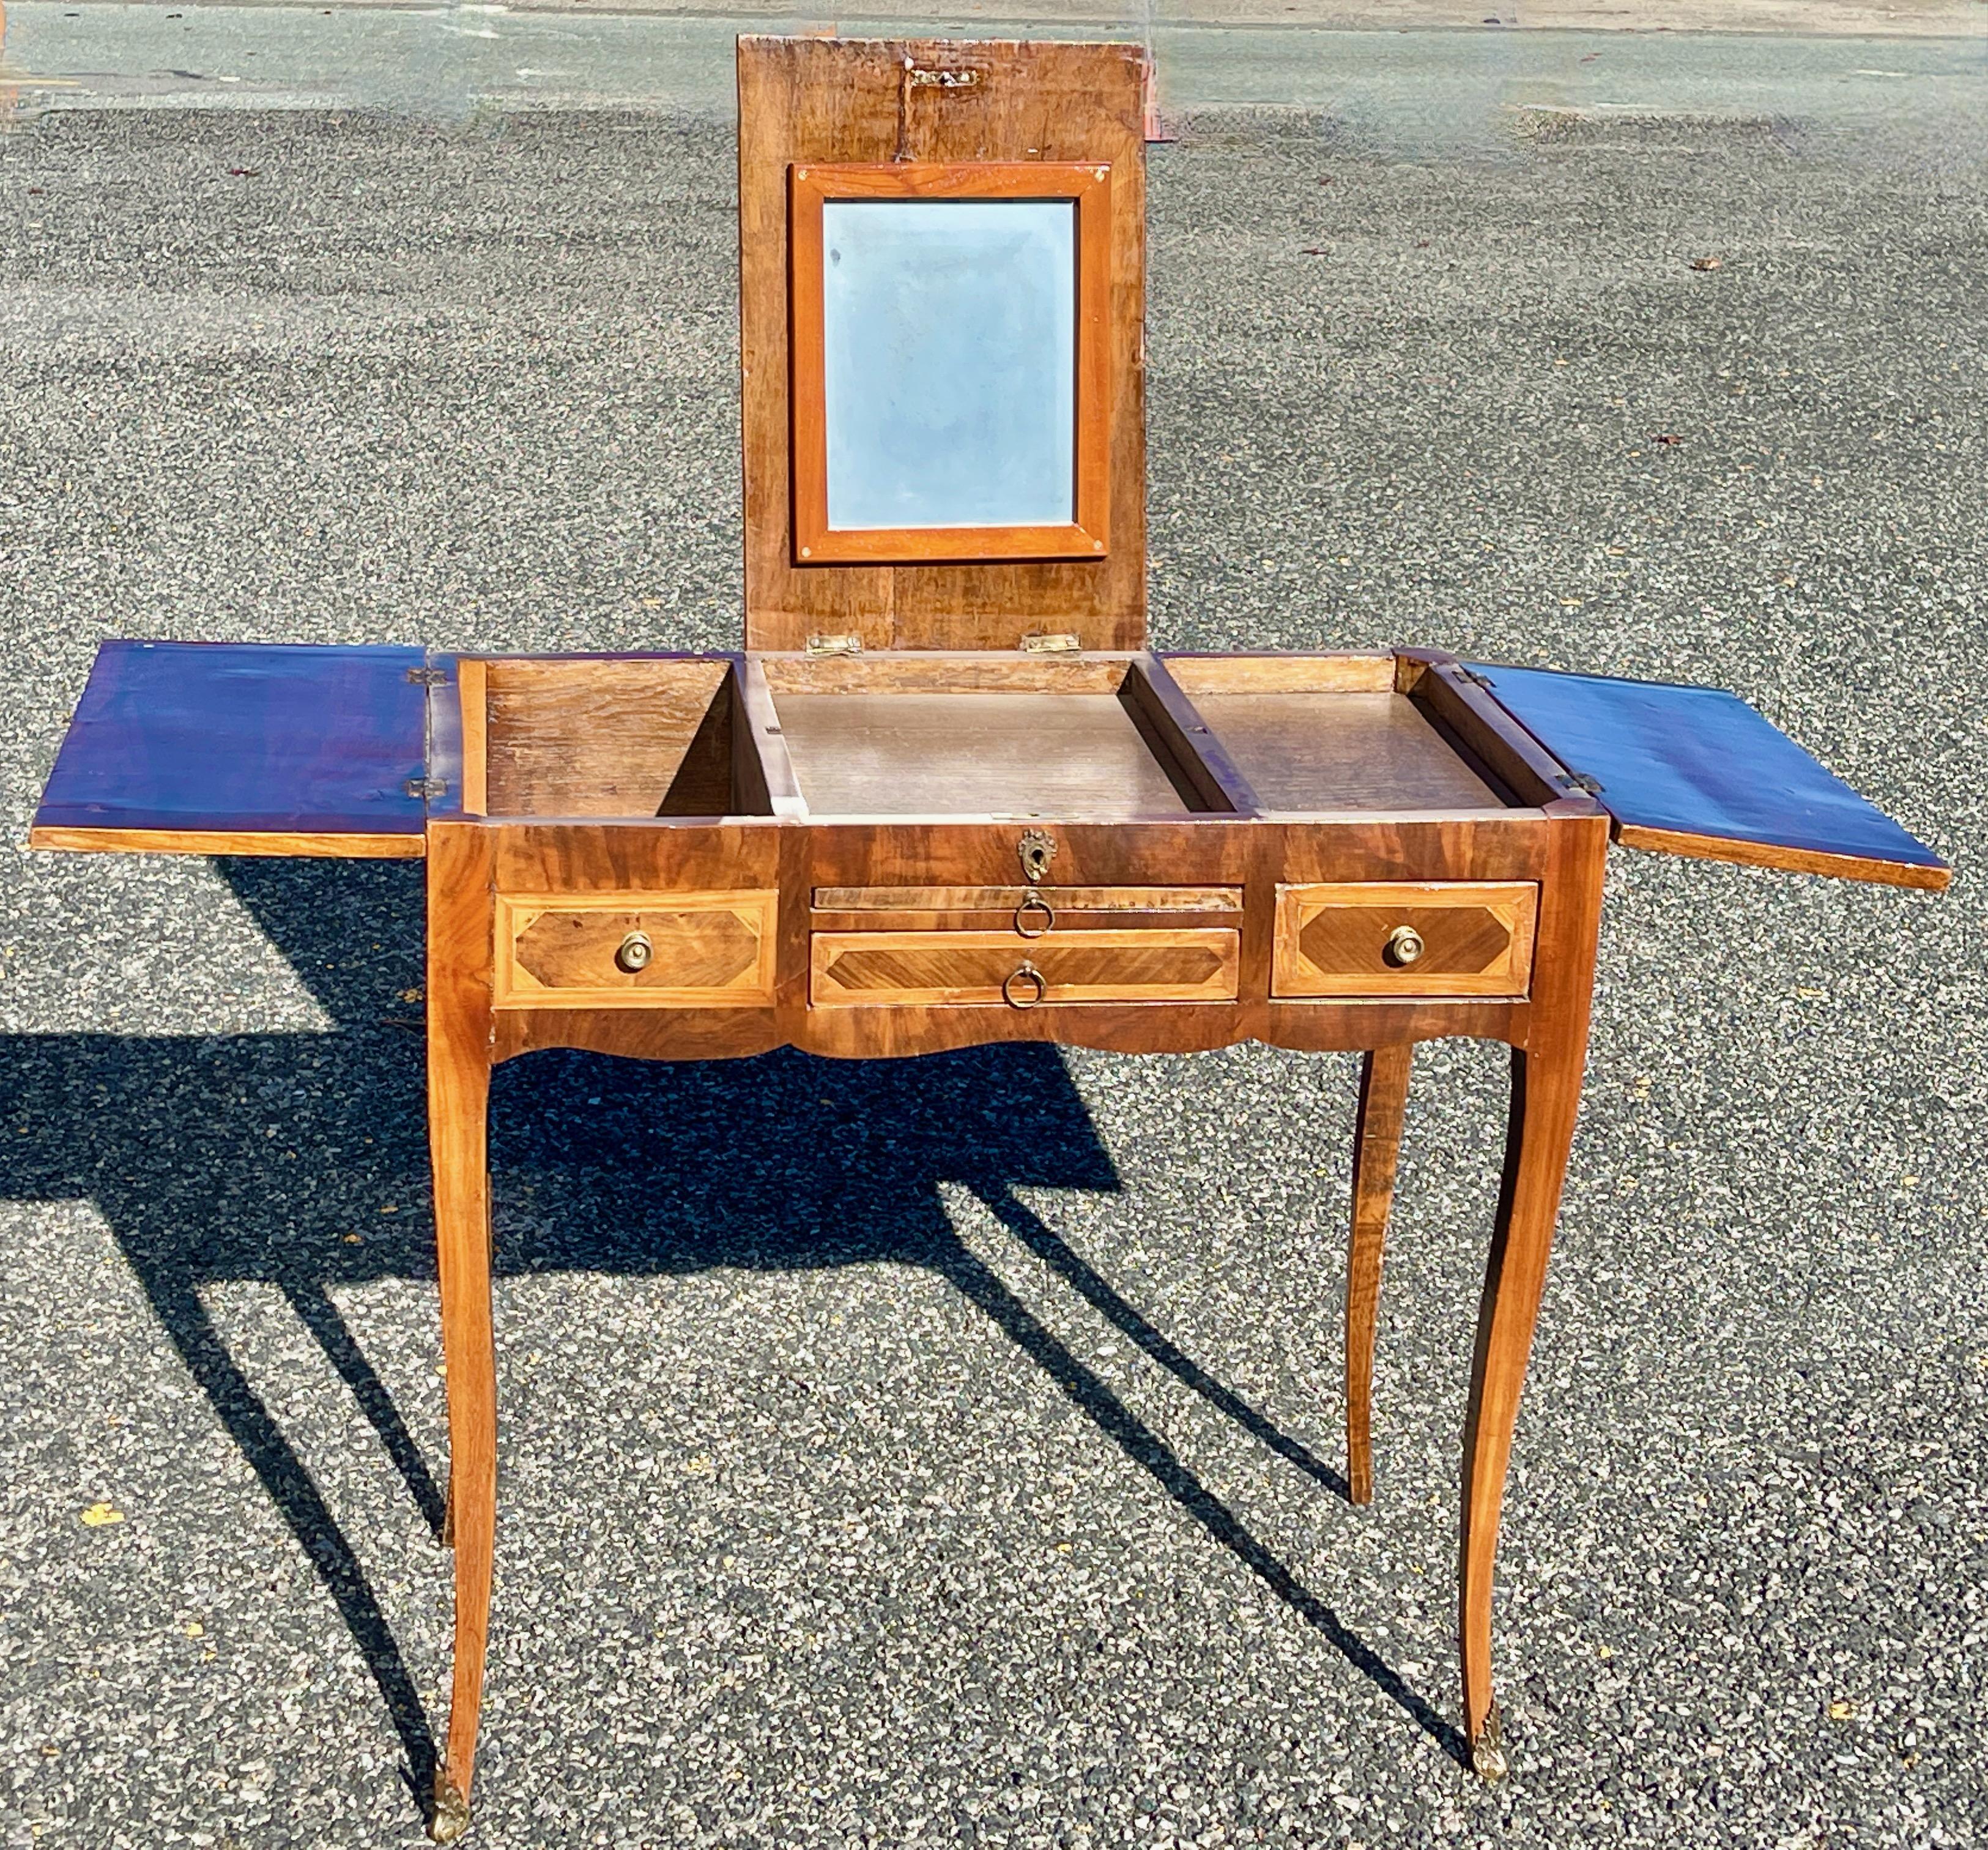 French nineteenth century Louis XV vanity dressing table, poudreuse or coiffeuse standing on four slender tapering cabriole legs. The top is divided into three parquetry framed panels decorated with elaborate mirrored parquetry; the central top